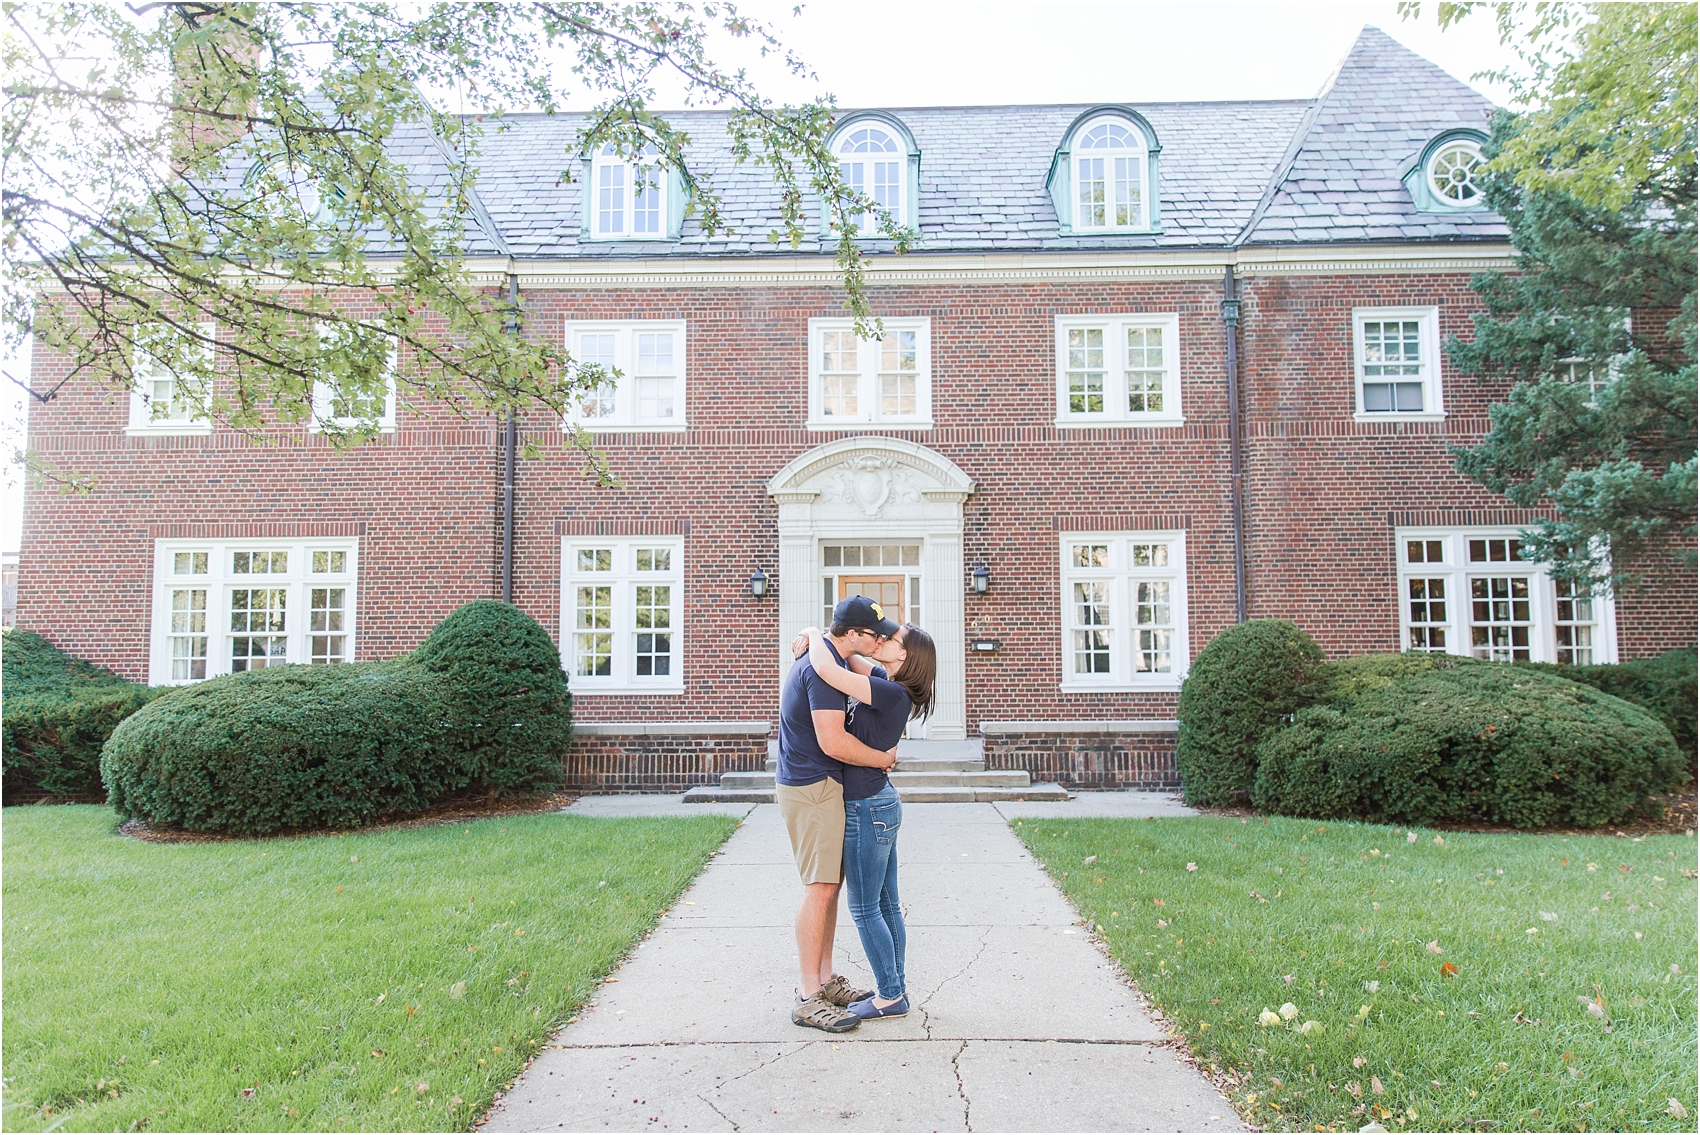 classic-fall-engagement-photos-at-the-university-of-michigan-in-ann-arbor-mi-by-courtney-carolyn-photography_0013.jpg